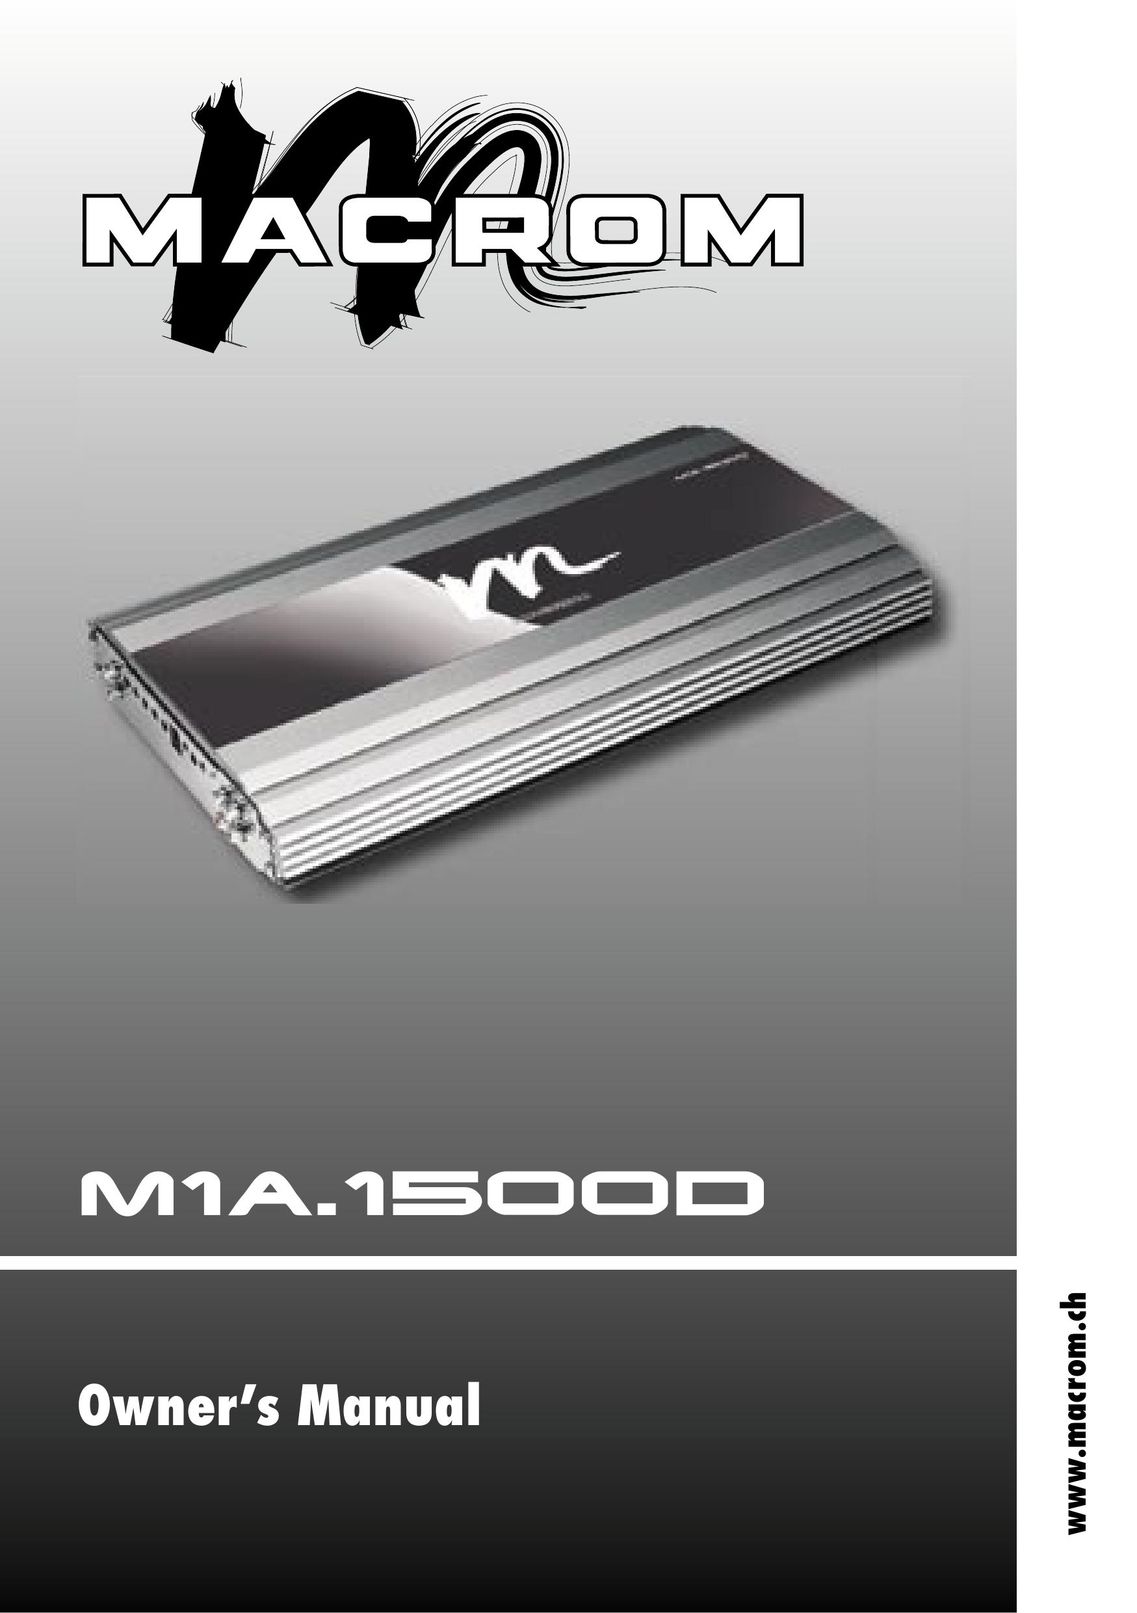 Macrom M1A.1500D Stereo Amplifier User Manual